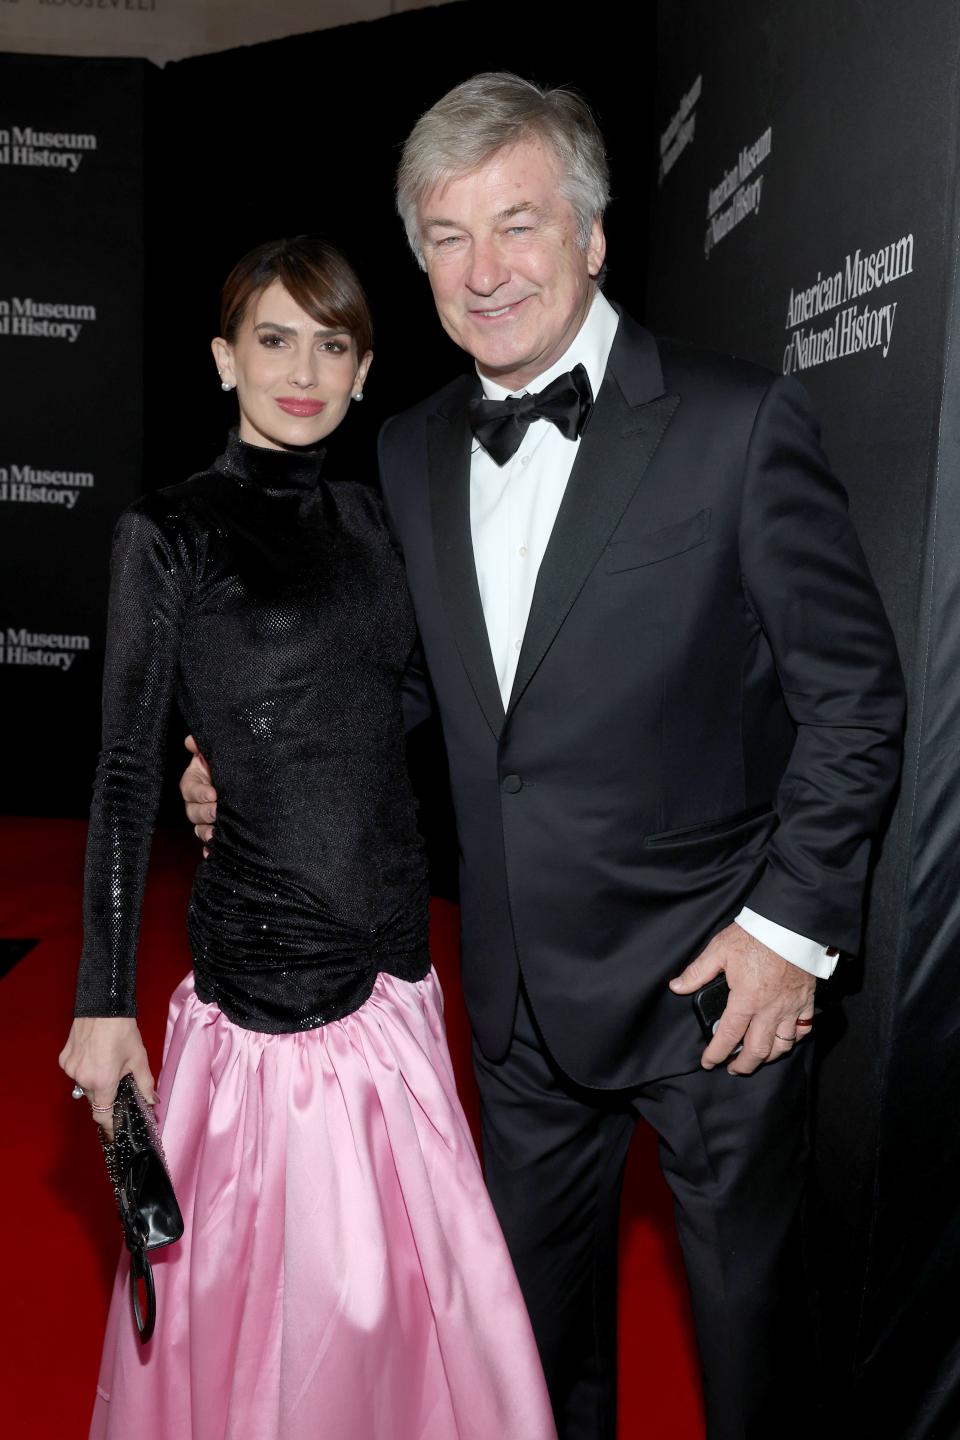 Alec Baldwin, right, and wife Hilaria attend a gala at the American Museum of Natural History on Nov. 30, 2023, in New York City.